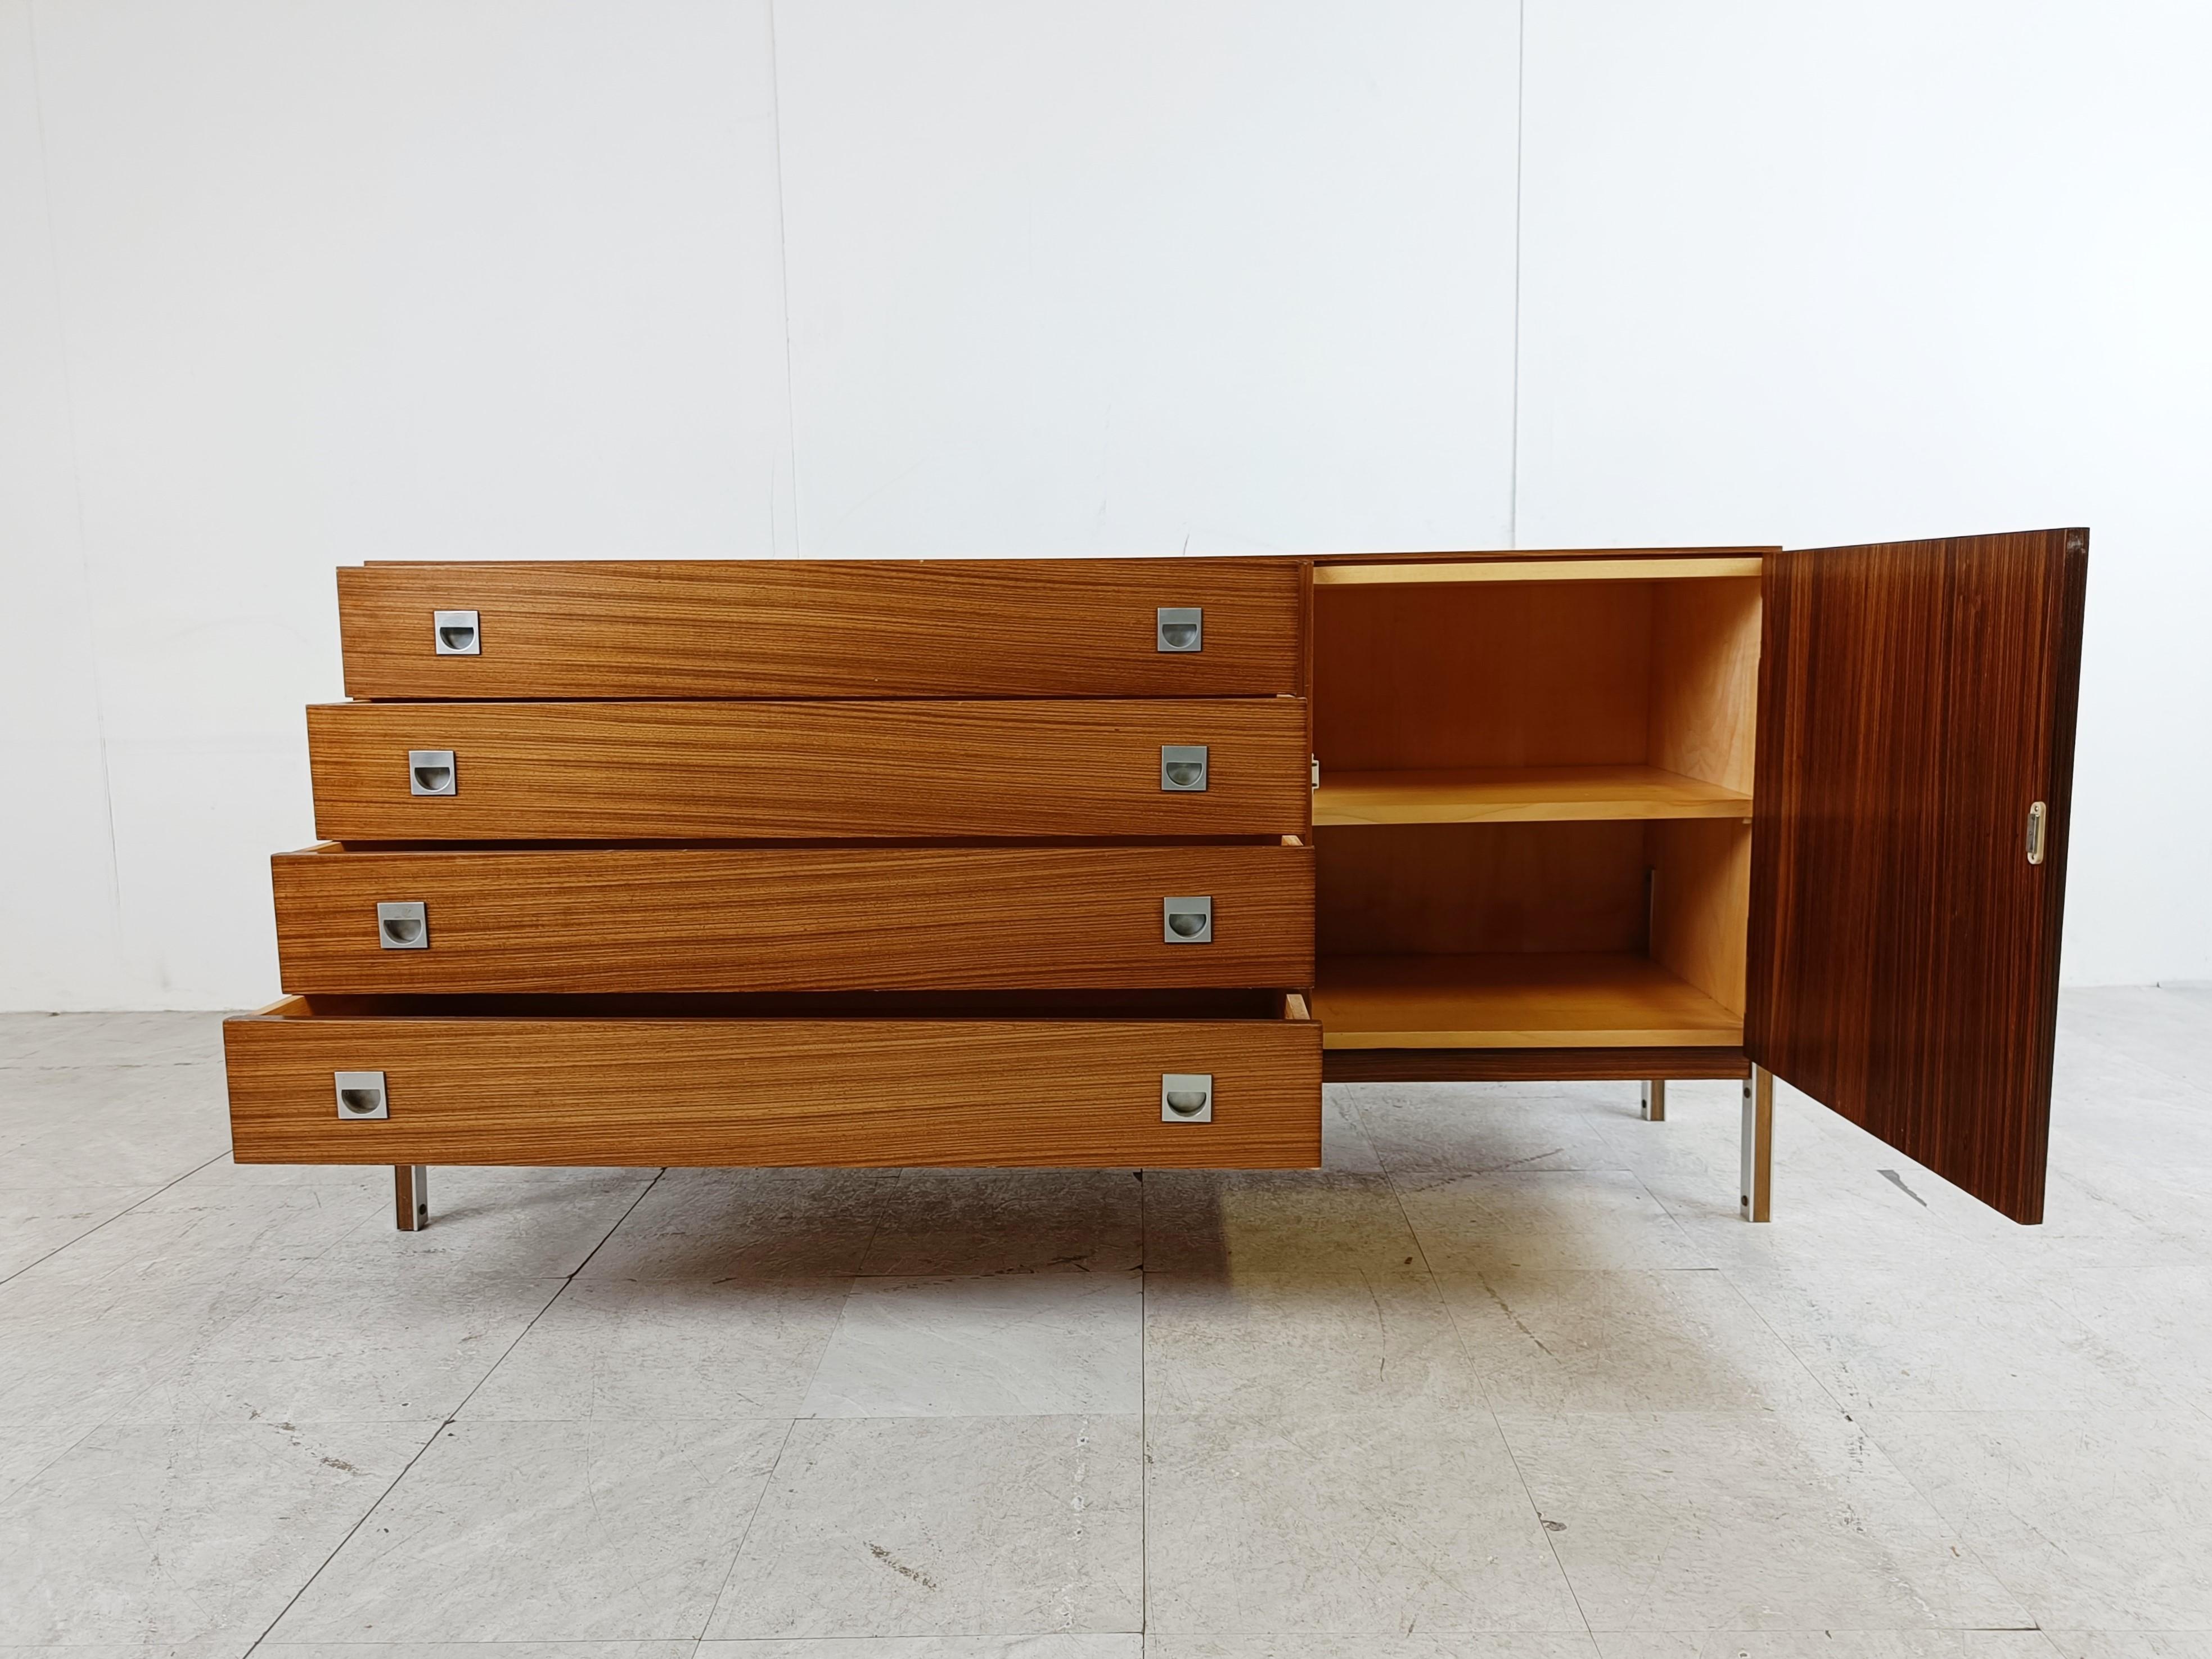 Midcentury wooden chest of drawers with a large round mirror.

Beautiful set for a hallway or bedroom.

Chromed metal legs.

1960s - Belgium

Dimensions:

Cabinet:
Lenght: 156cm/61.41